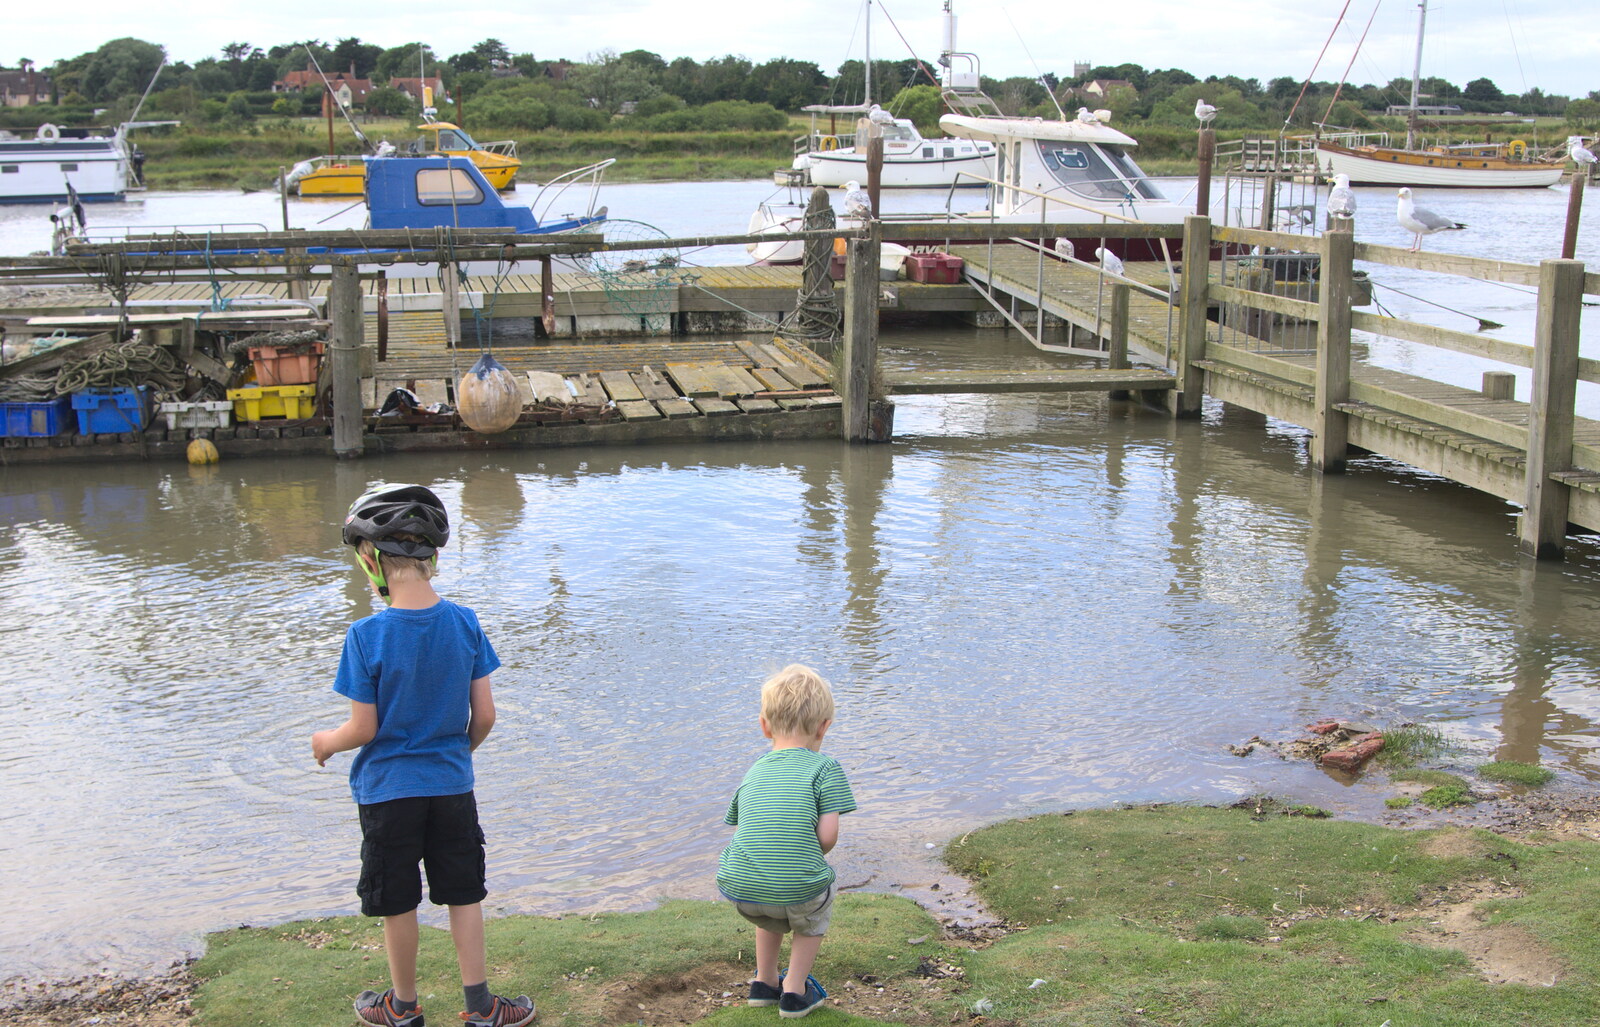 The boys by the river from The Danger of Trees: A Camping (Mis)adventure - Southwold, Suffolk - 3rd August 2015